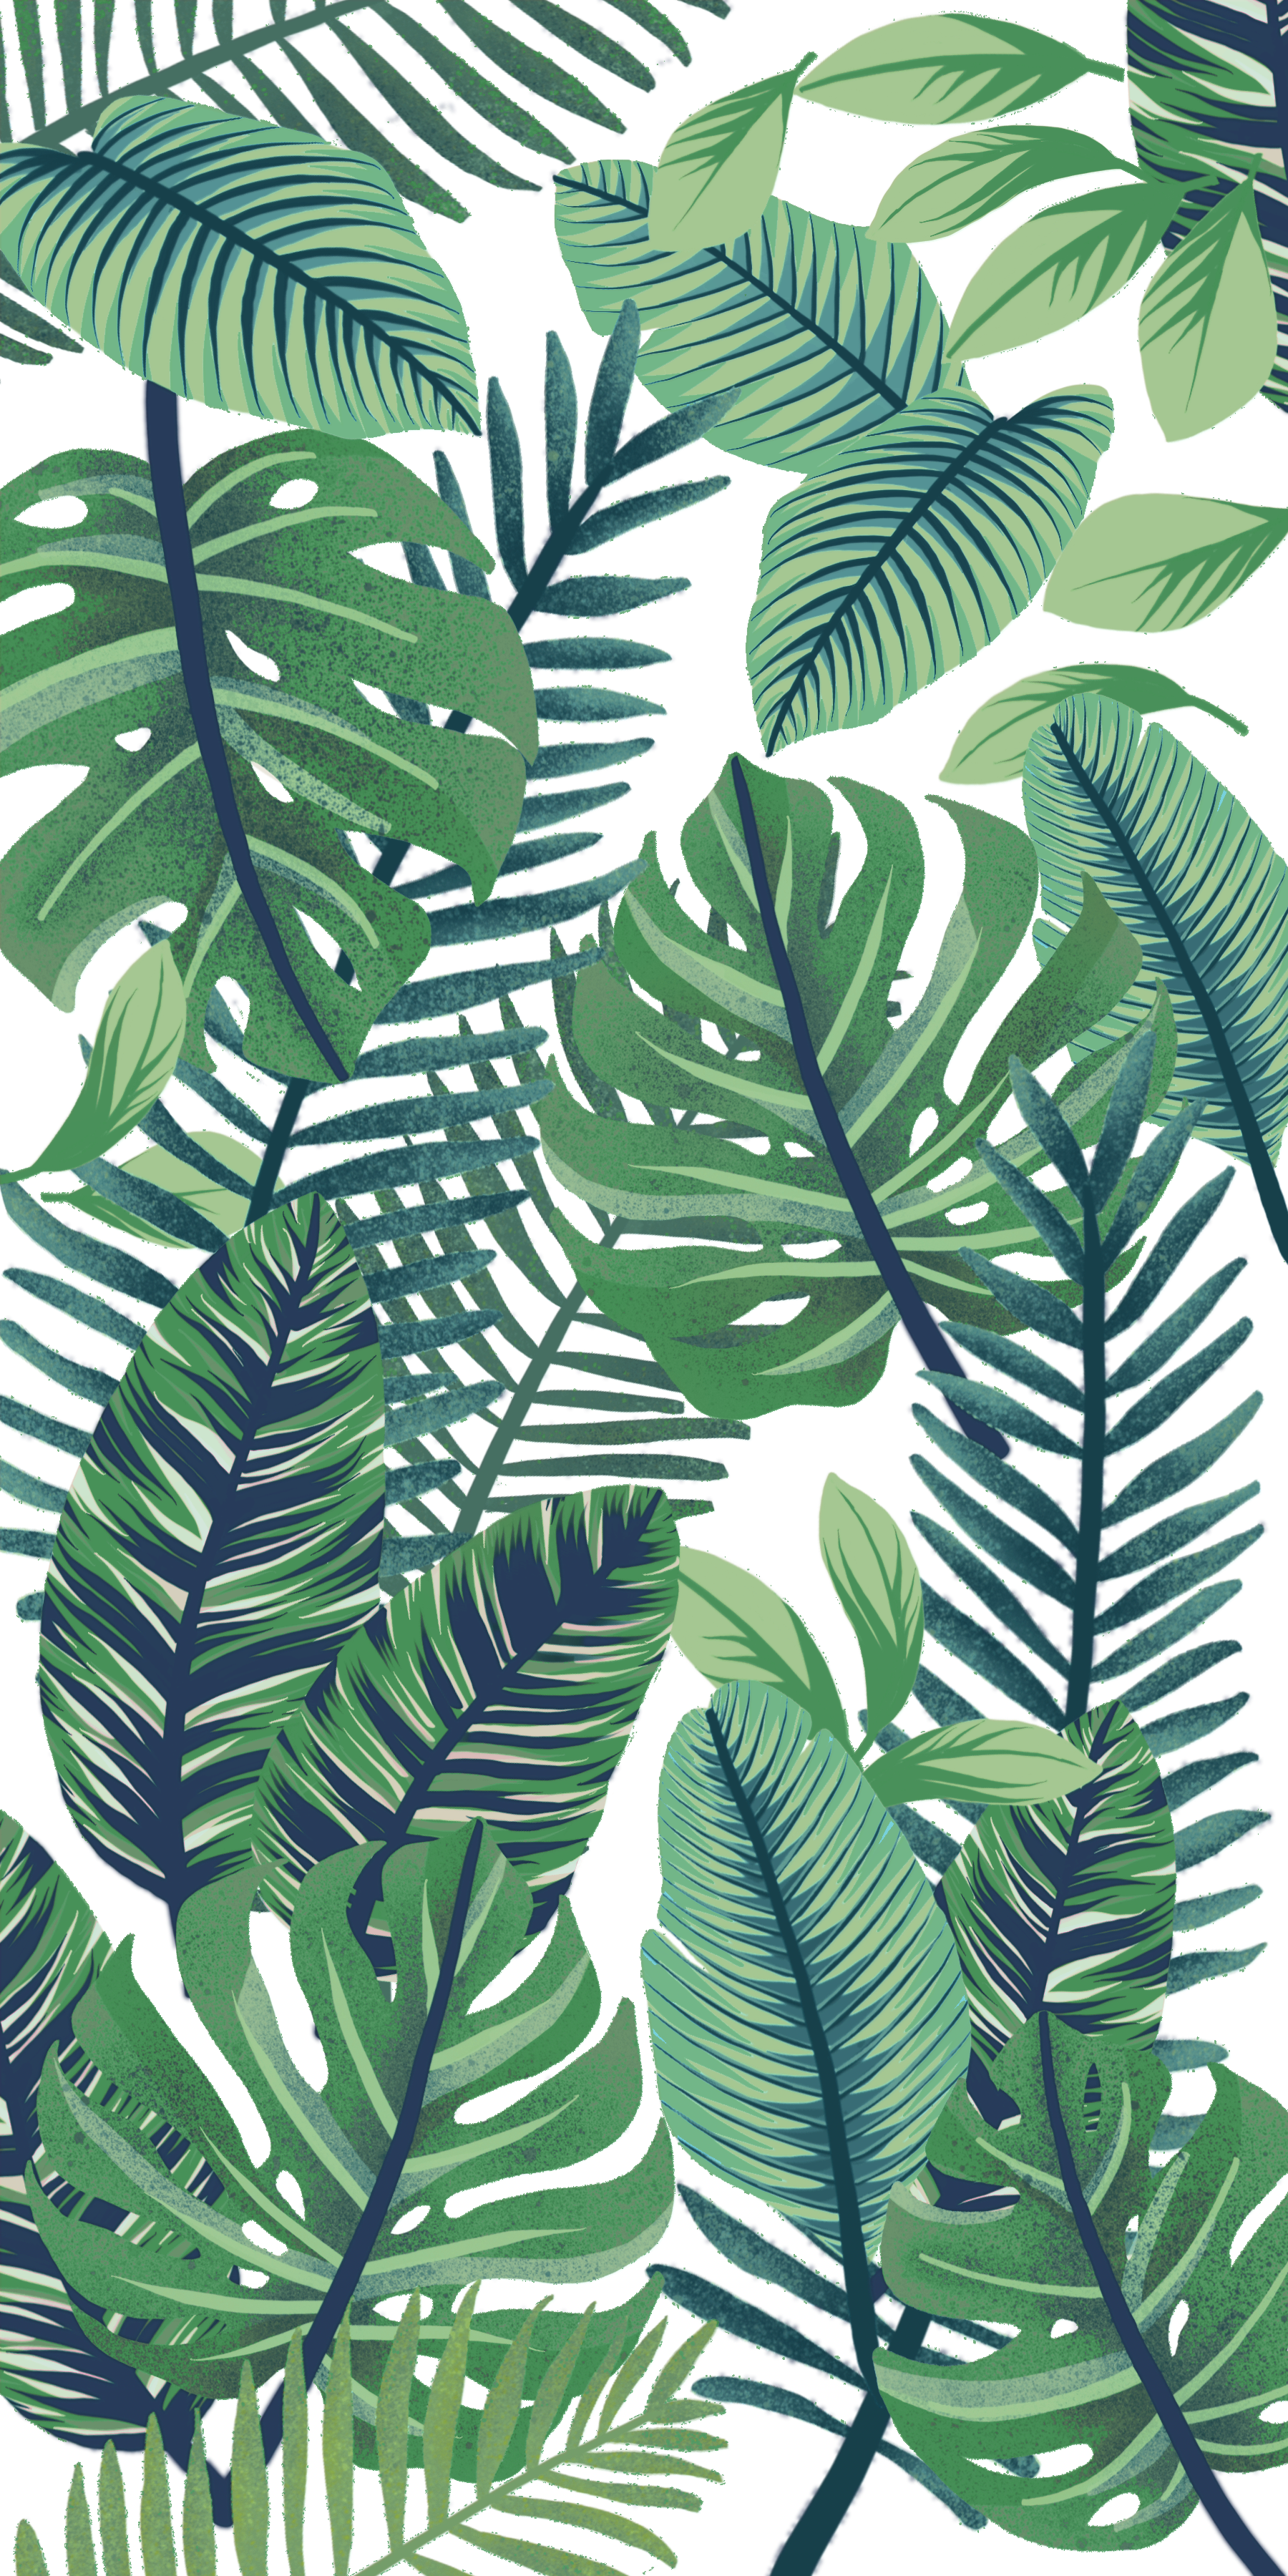 Green #Jungle. #Casetify #iPhone #Art #Design #Foliage #Floral #astheticwallpaperiphone. Plant wallpaper, Floral wallpaper, Leaves wallpaper iphone